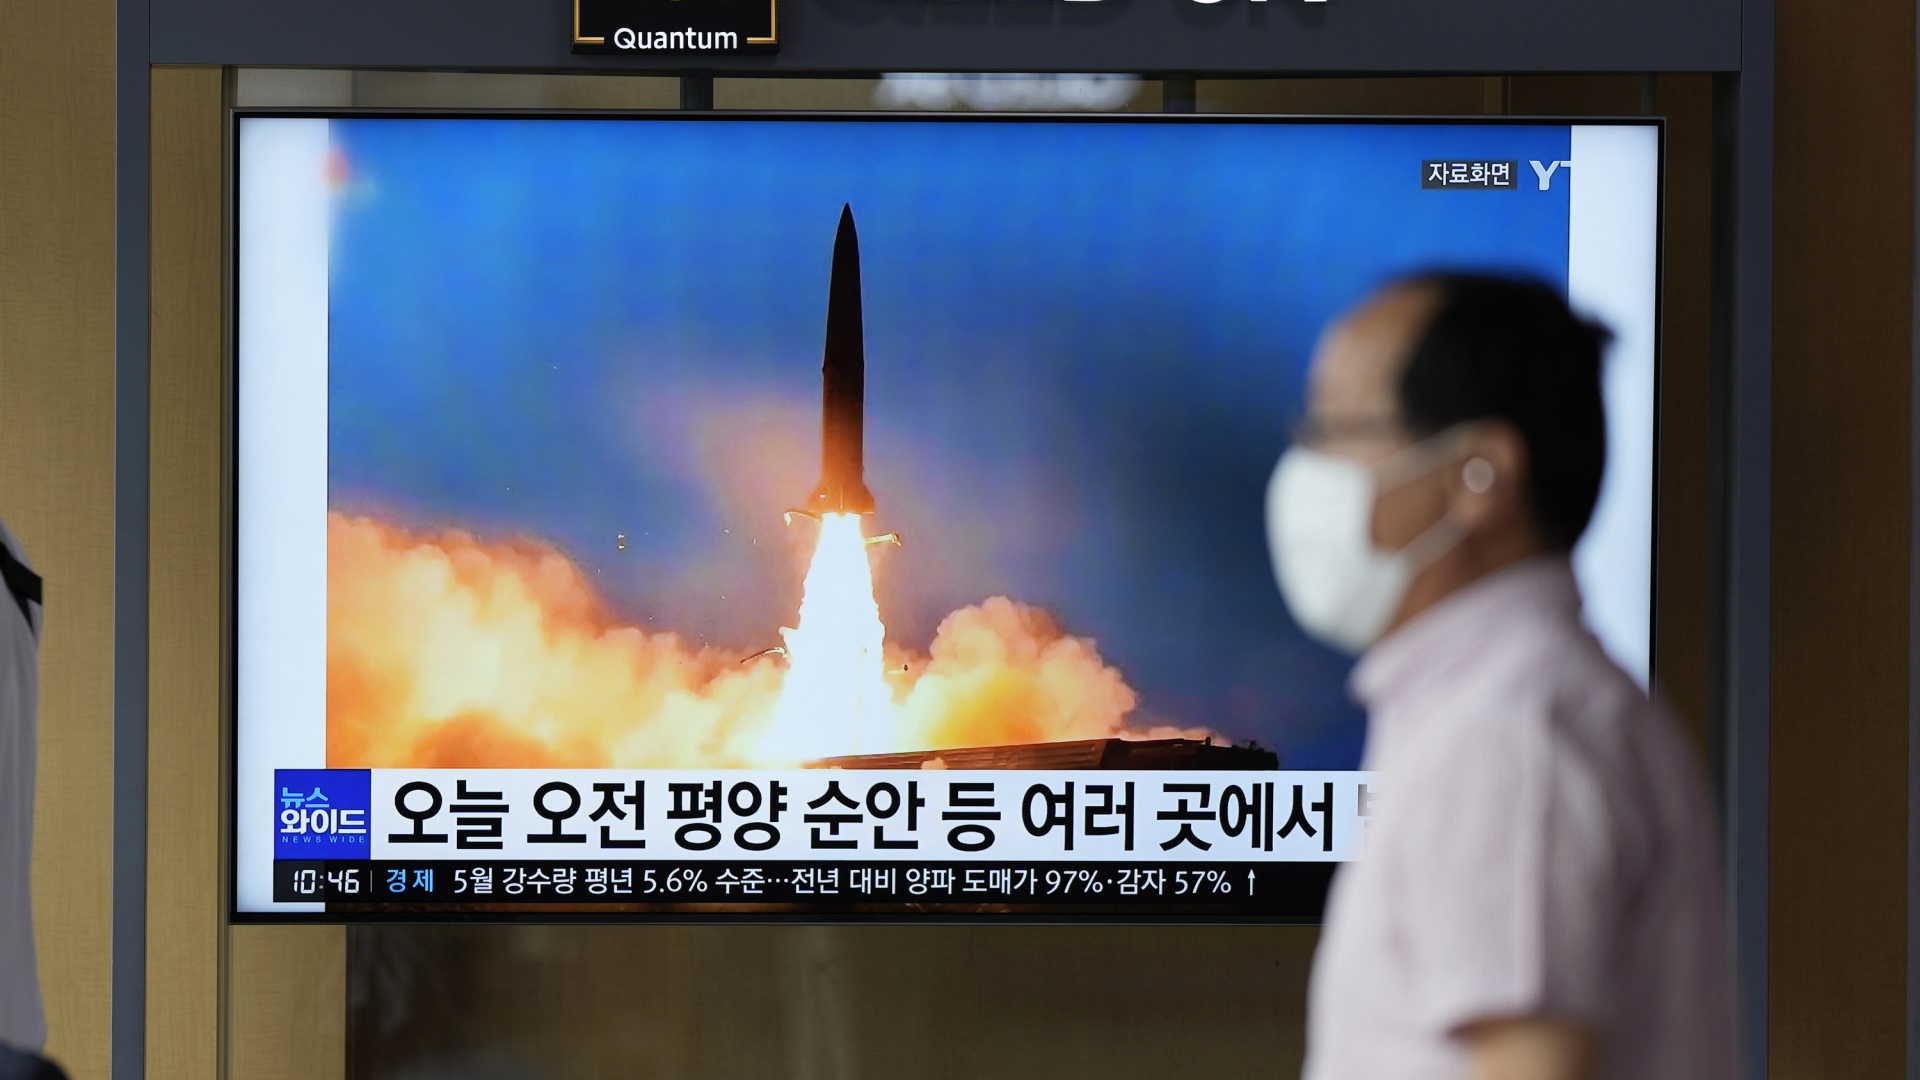 North Korea Missile Tests: South Korea and US shoot down missiles